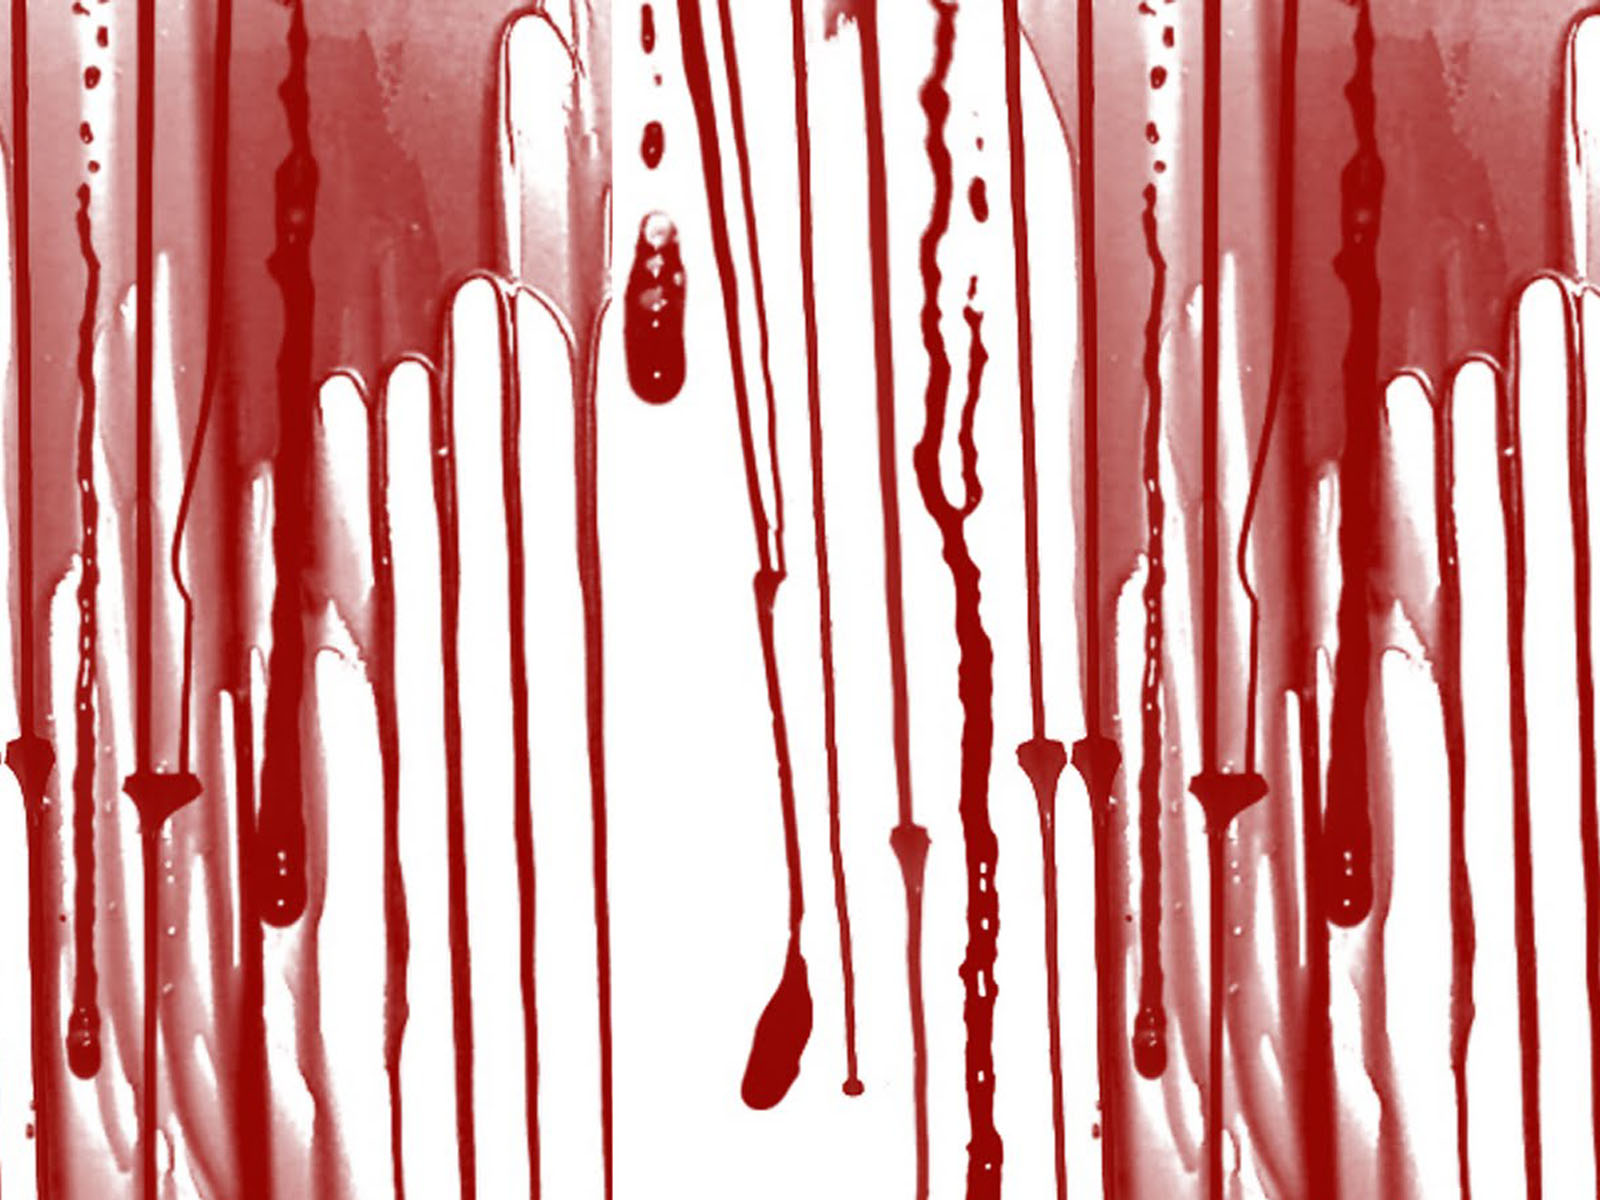 clipart of blood dripping - photo #31